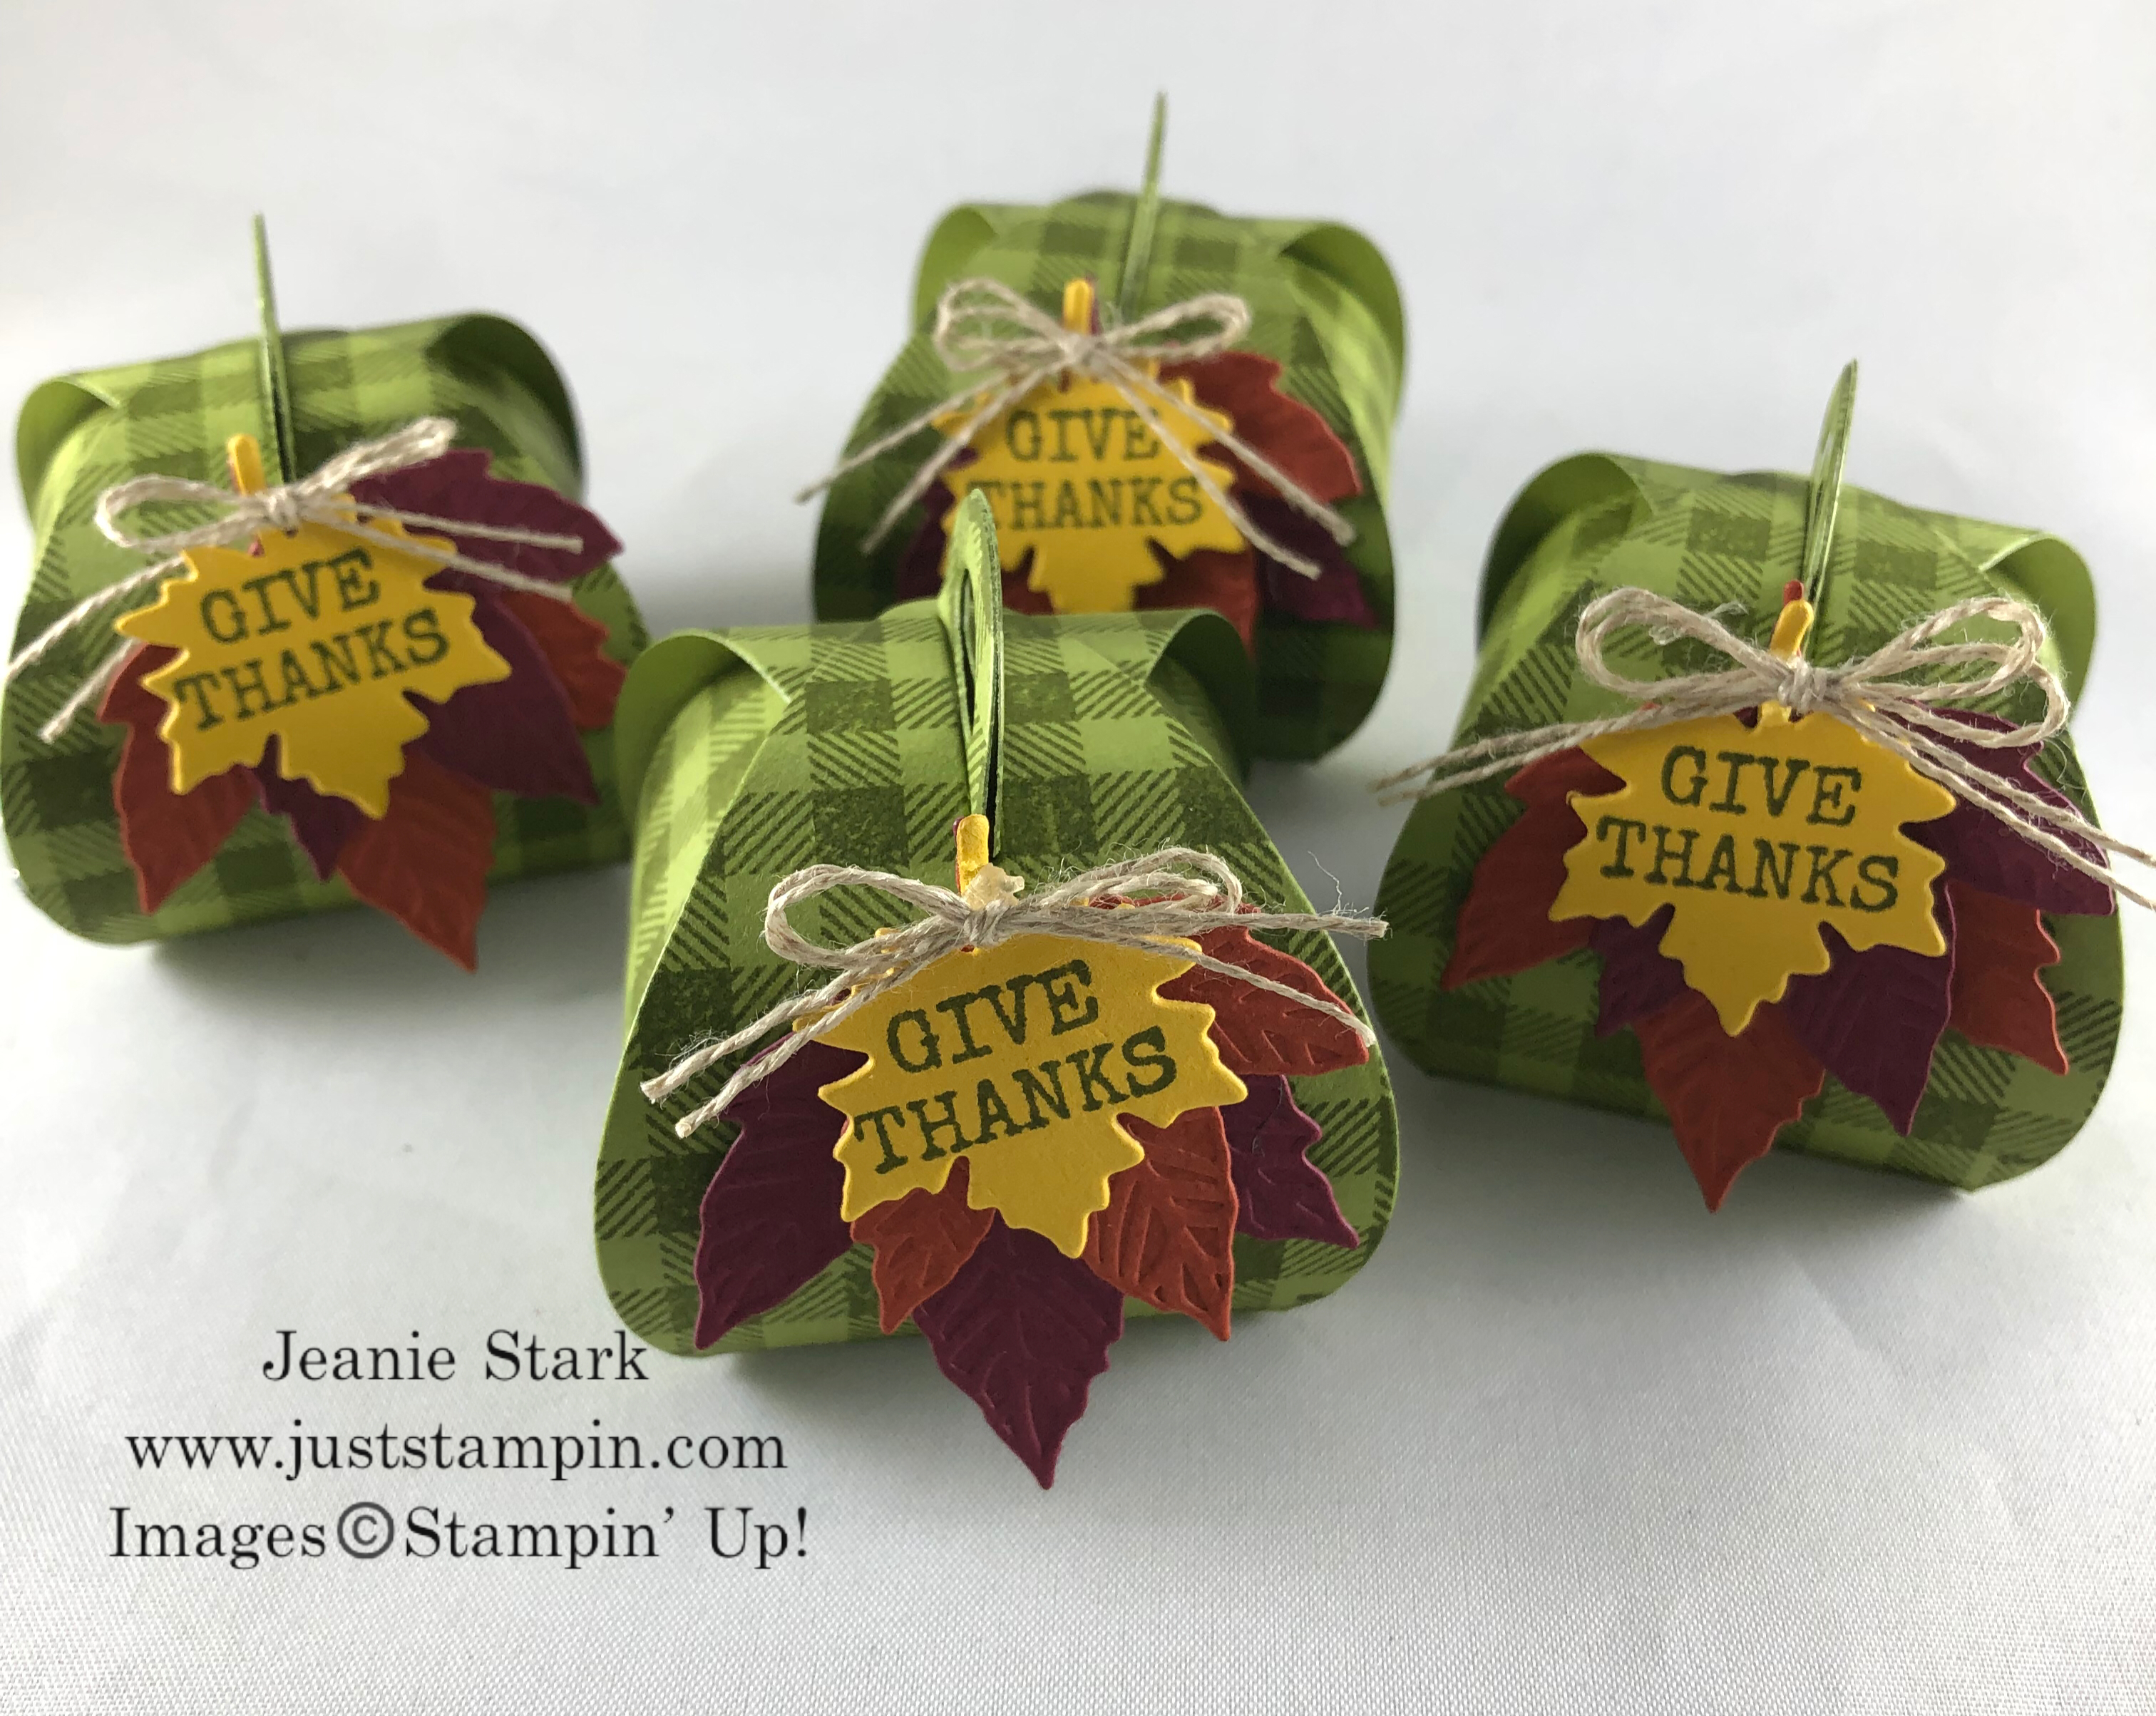 Stampin' Up! Mini Curvy Keepsake Box Dies Fall or Thanksgiving table favor idea - Jeanie Stark StampinUp